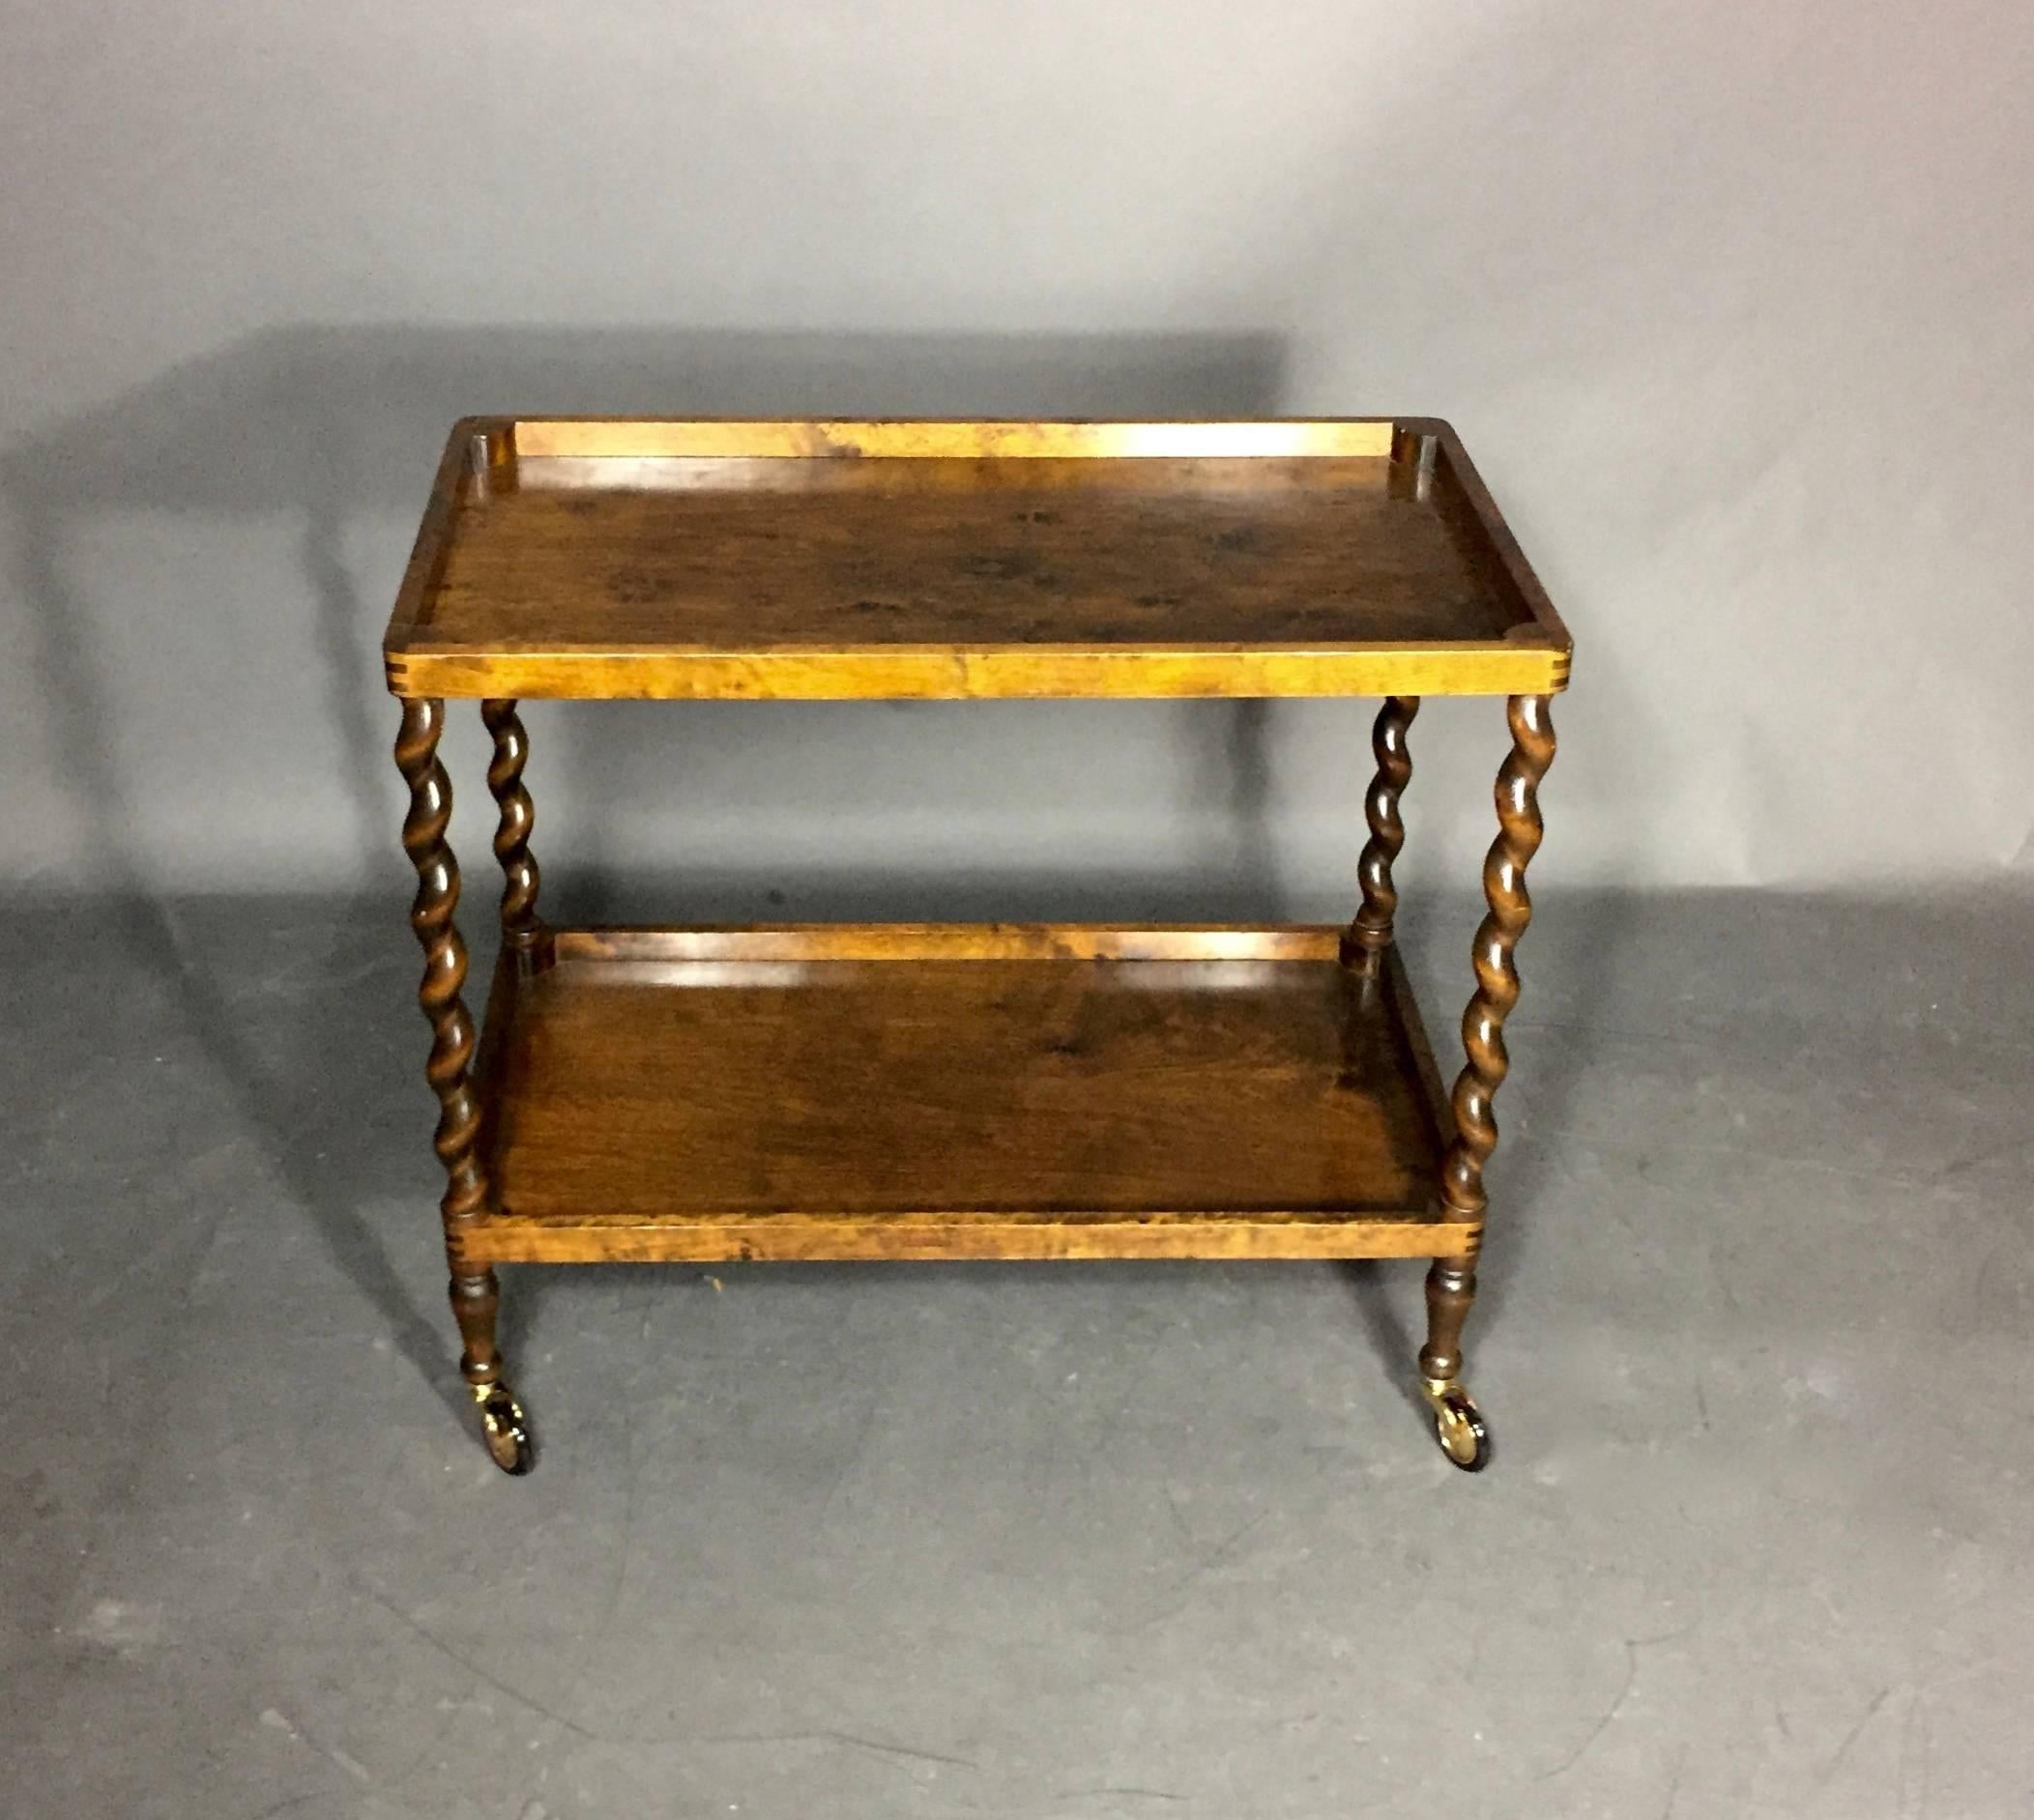 Clean and fresh lines of this simple mahogany drinks trolley with beautifully turned spiral legs that make the piece elegant and warm. Nicely curved corners and a lower repeat shelf. Newly updated brass wheels.